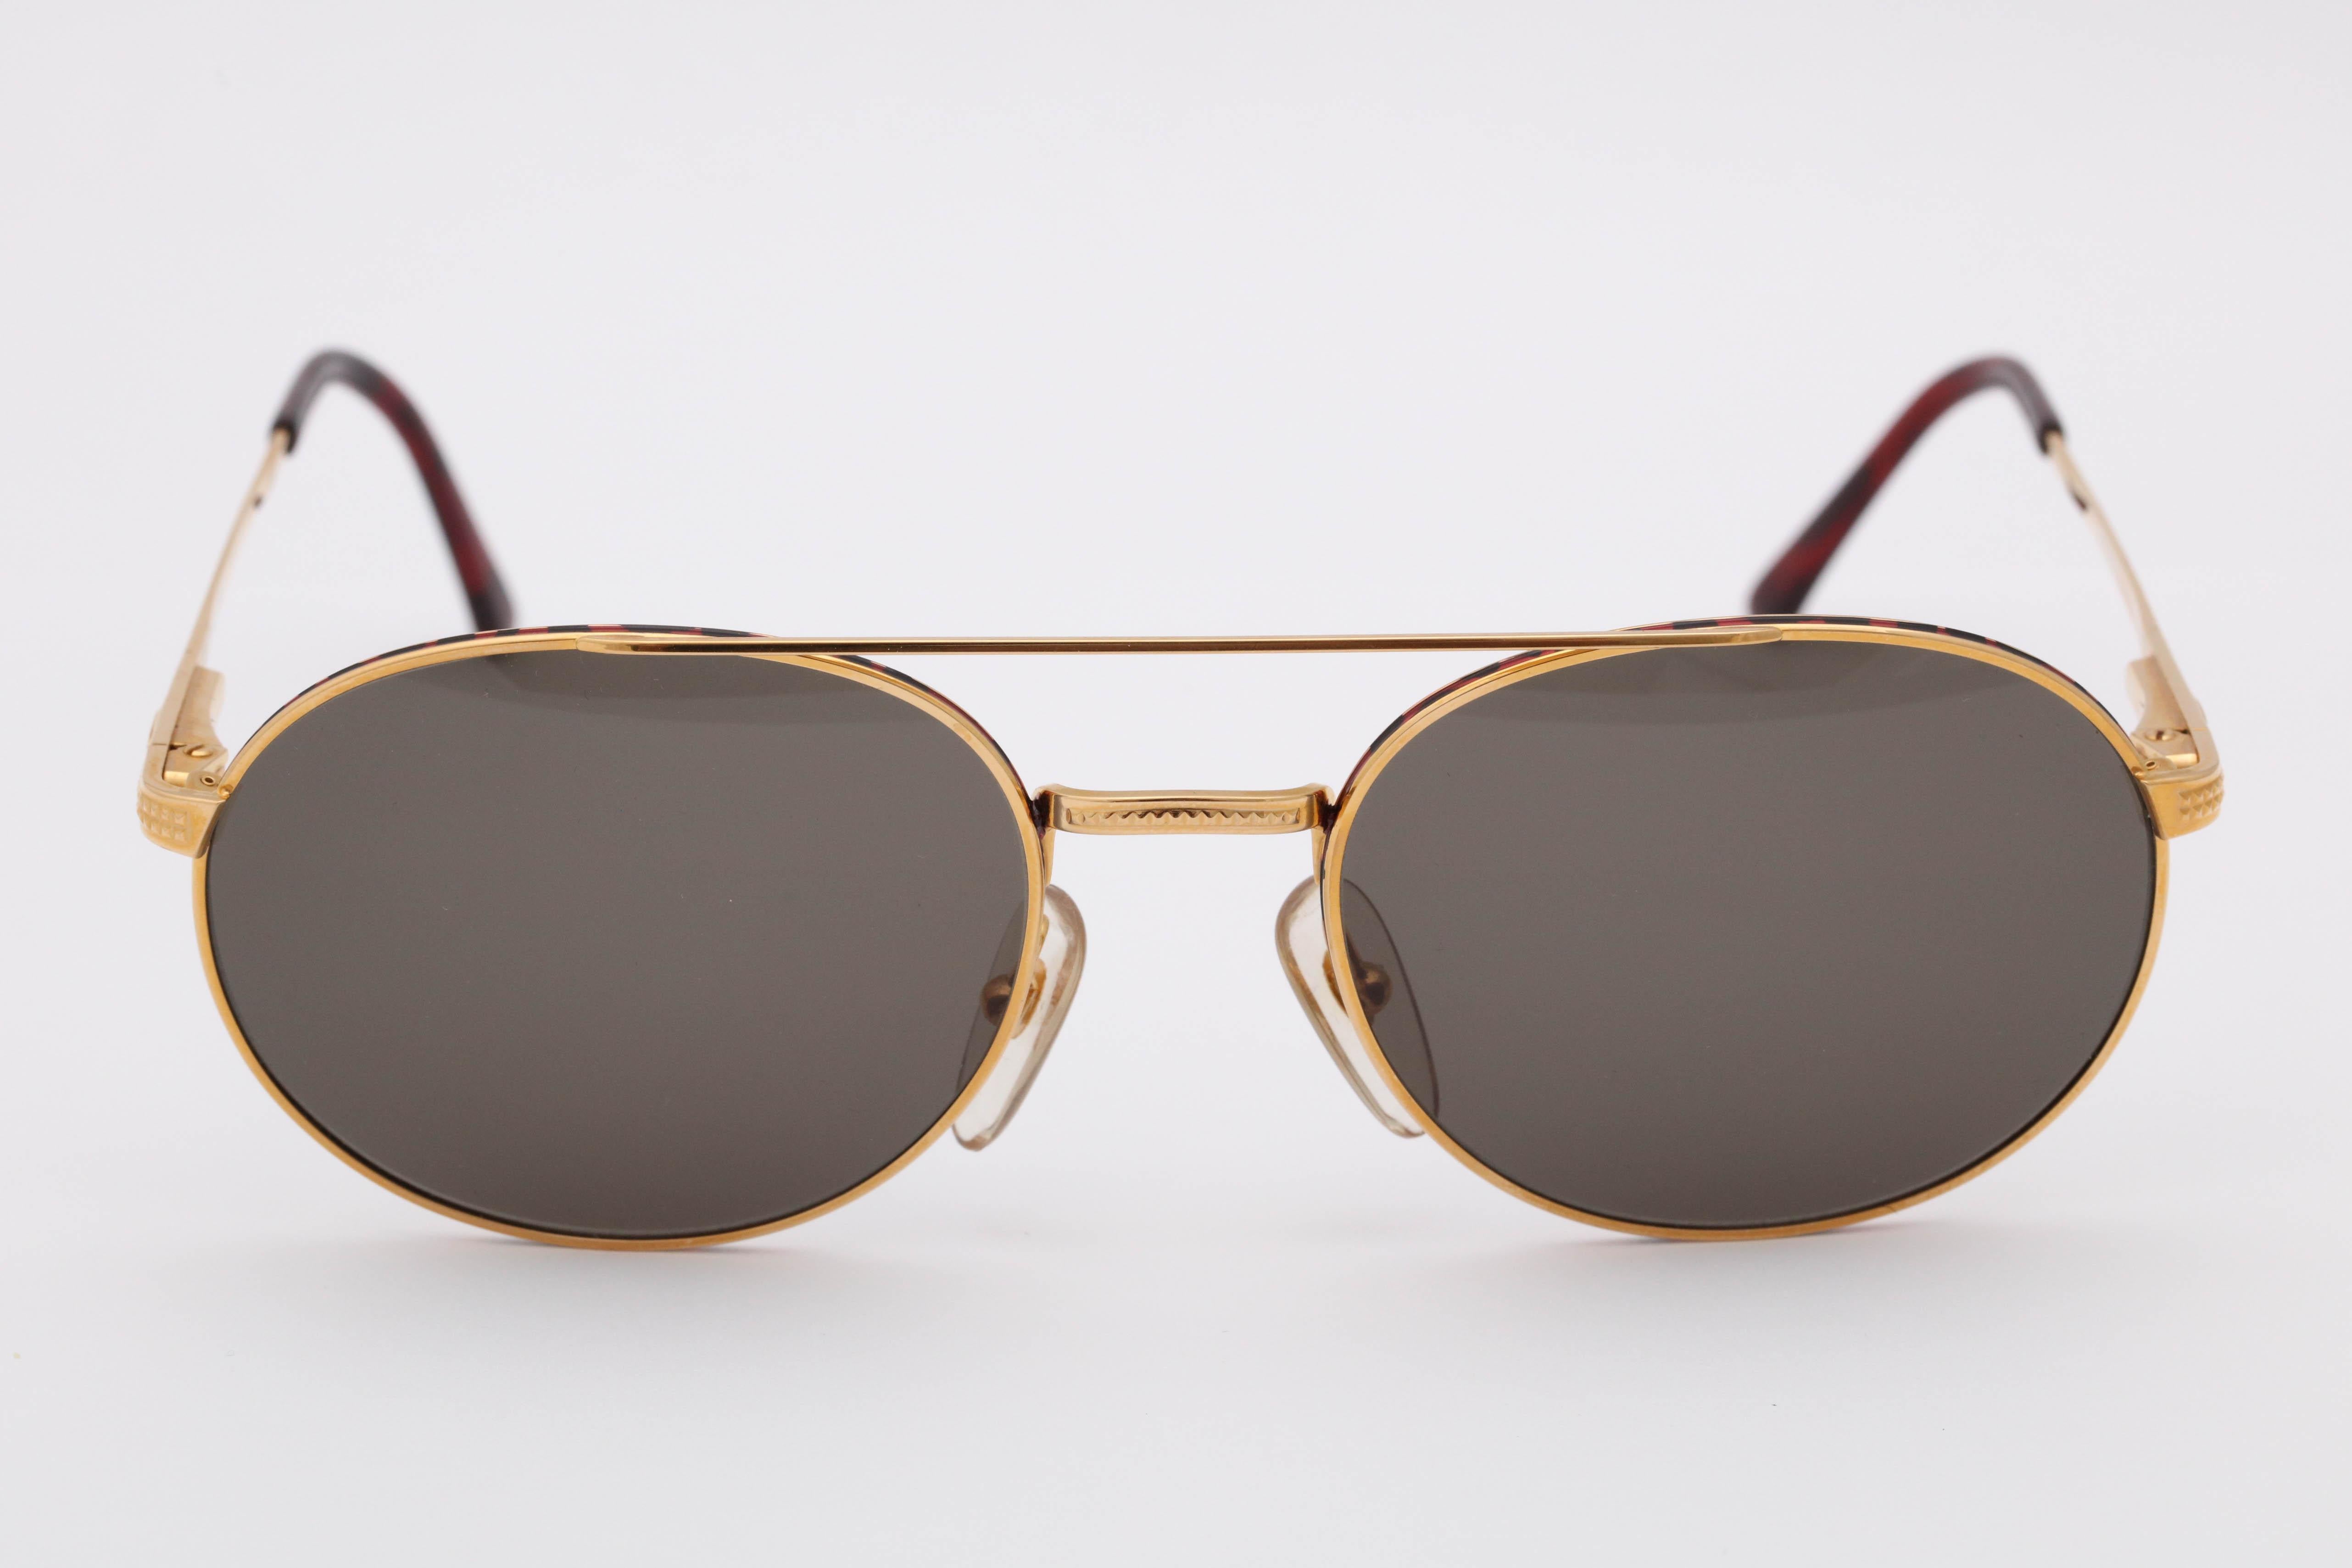 Christian Dior Aviator Vintage Sunglasses 2779 In Excellent Condition For Sale In Chicago, IL